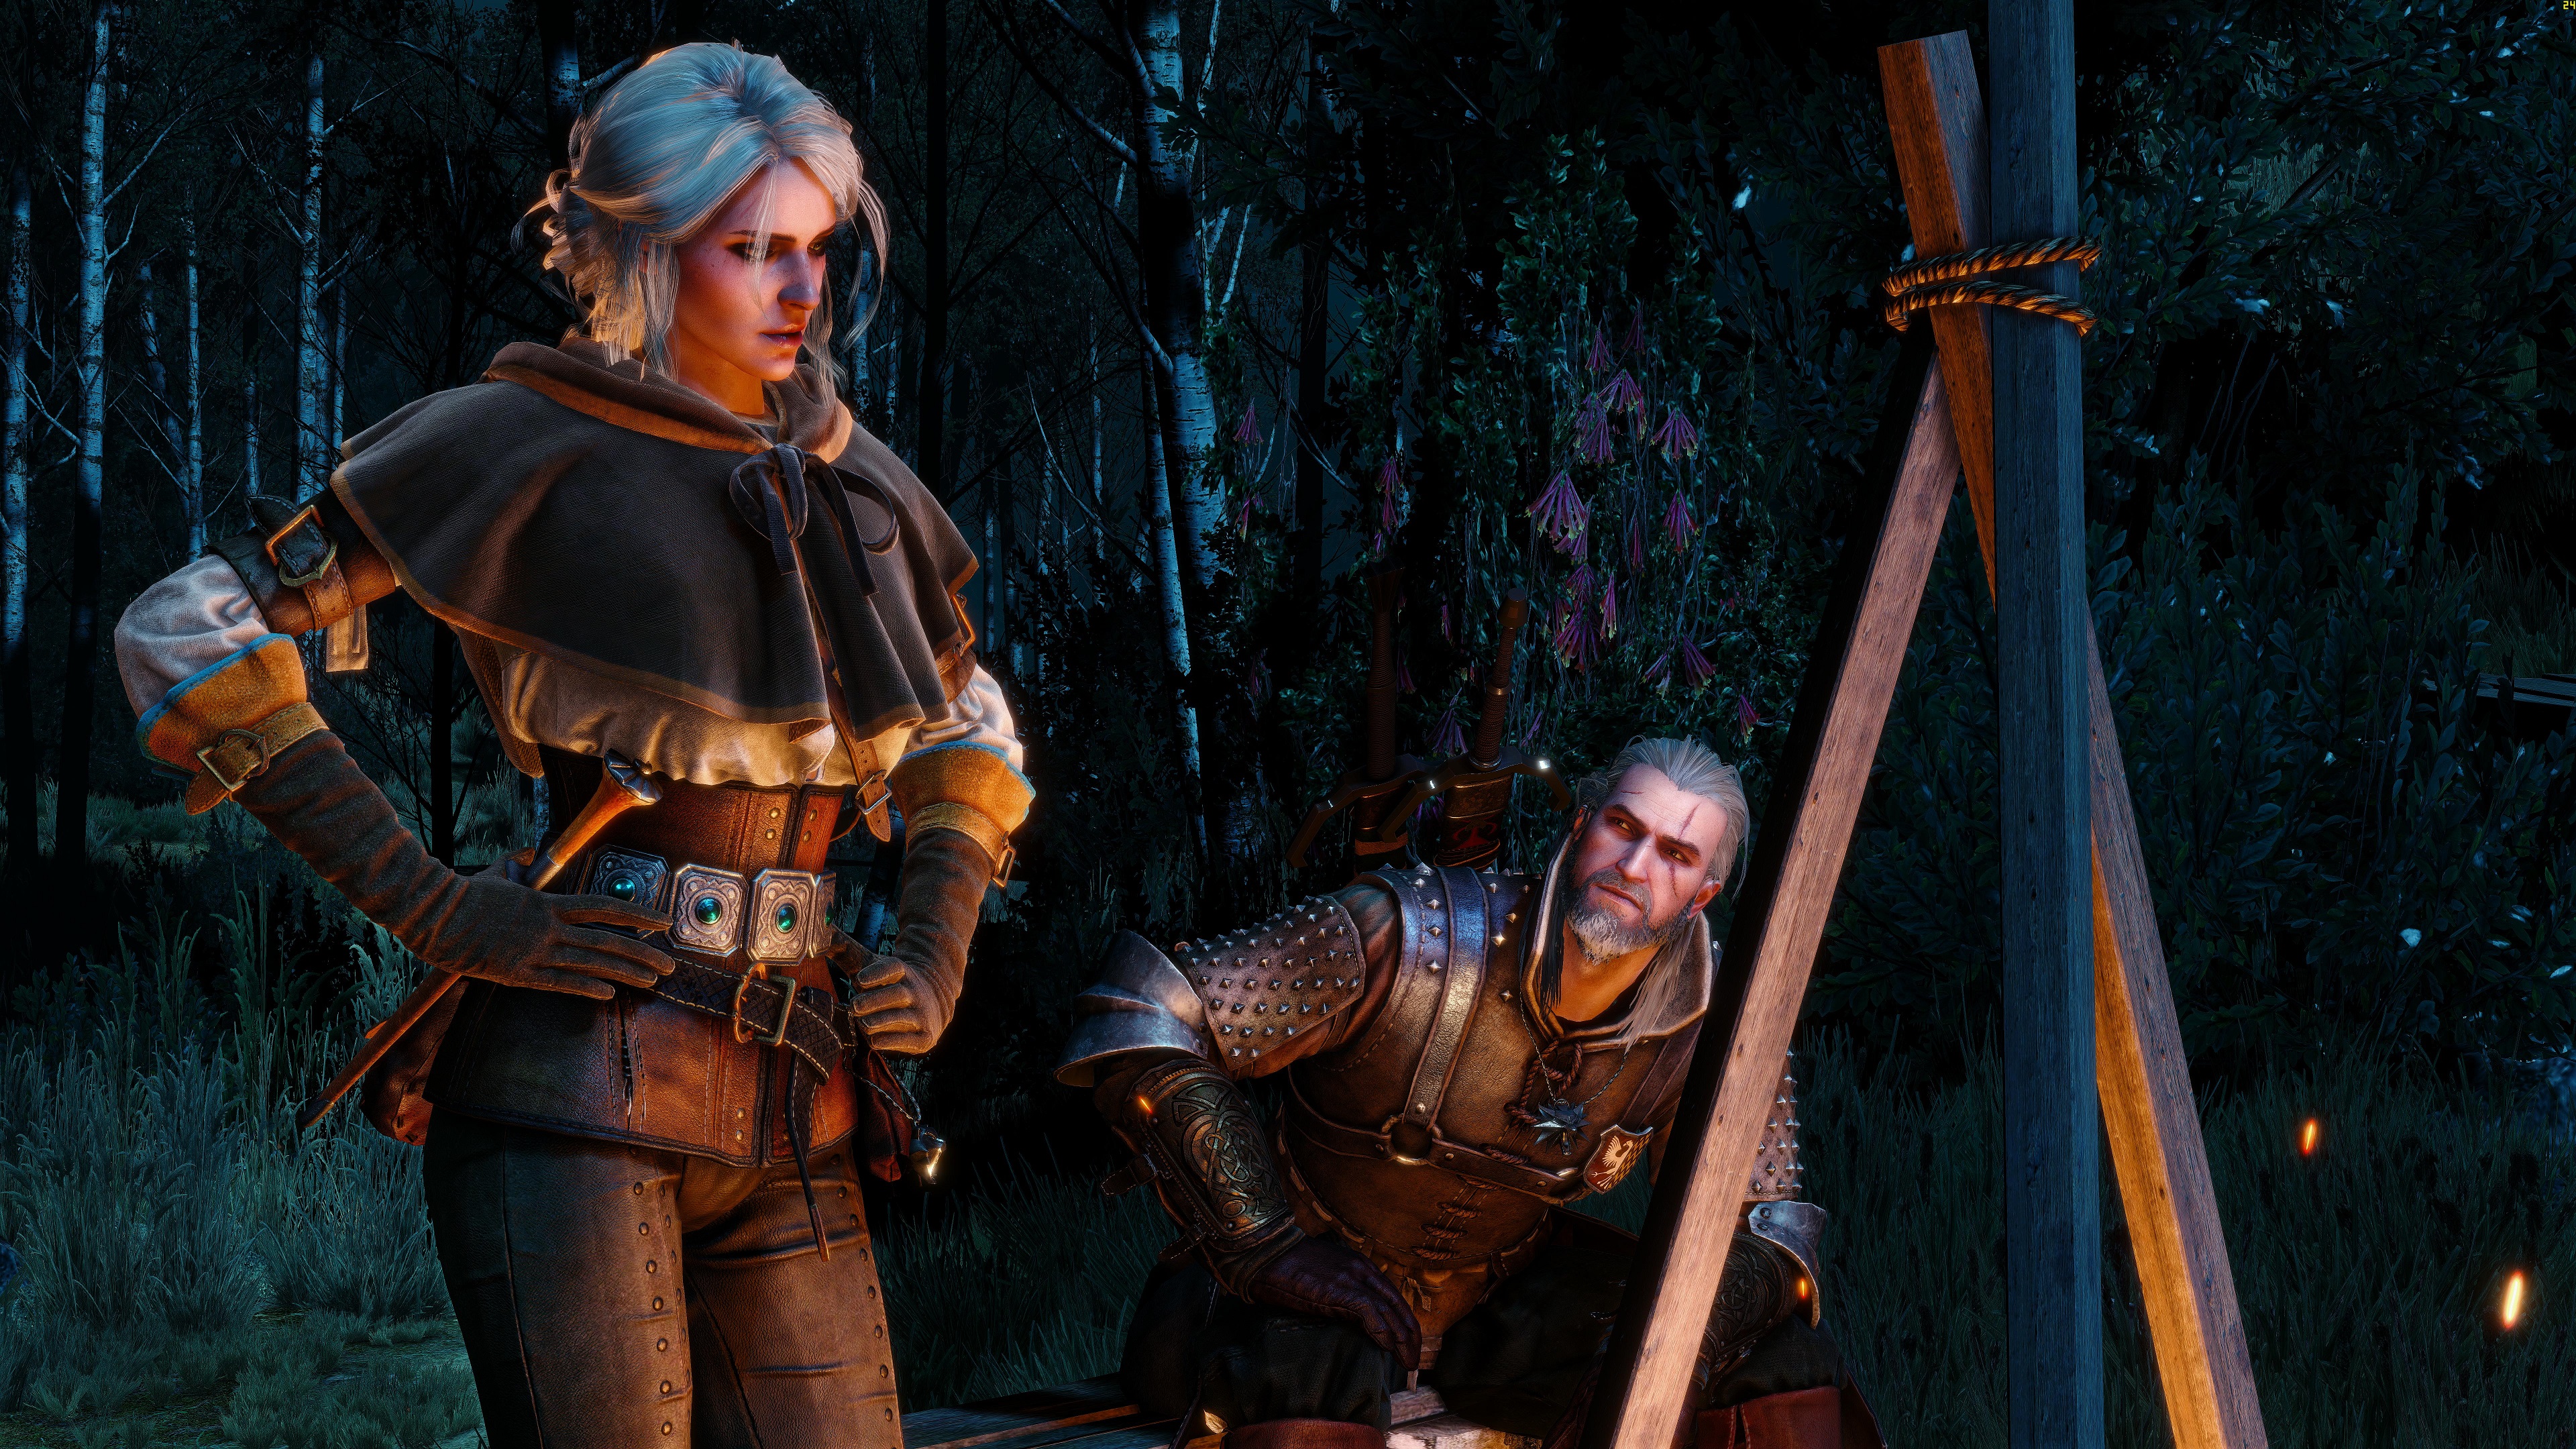 General 3840x2160 The Witcher 3: Wild Hunt The Witcher Cirilla Fiona Elen Riannon Geralt of Rivia video games video game characters